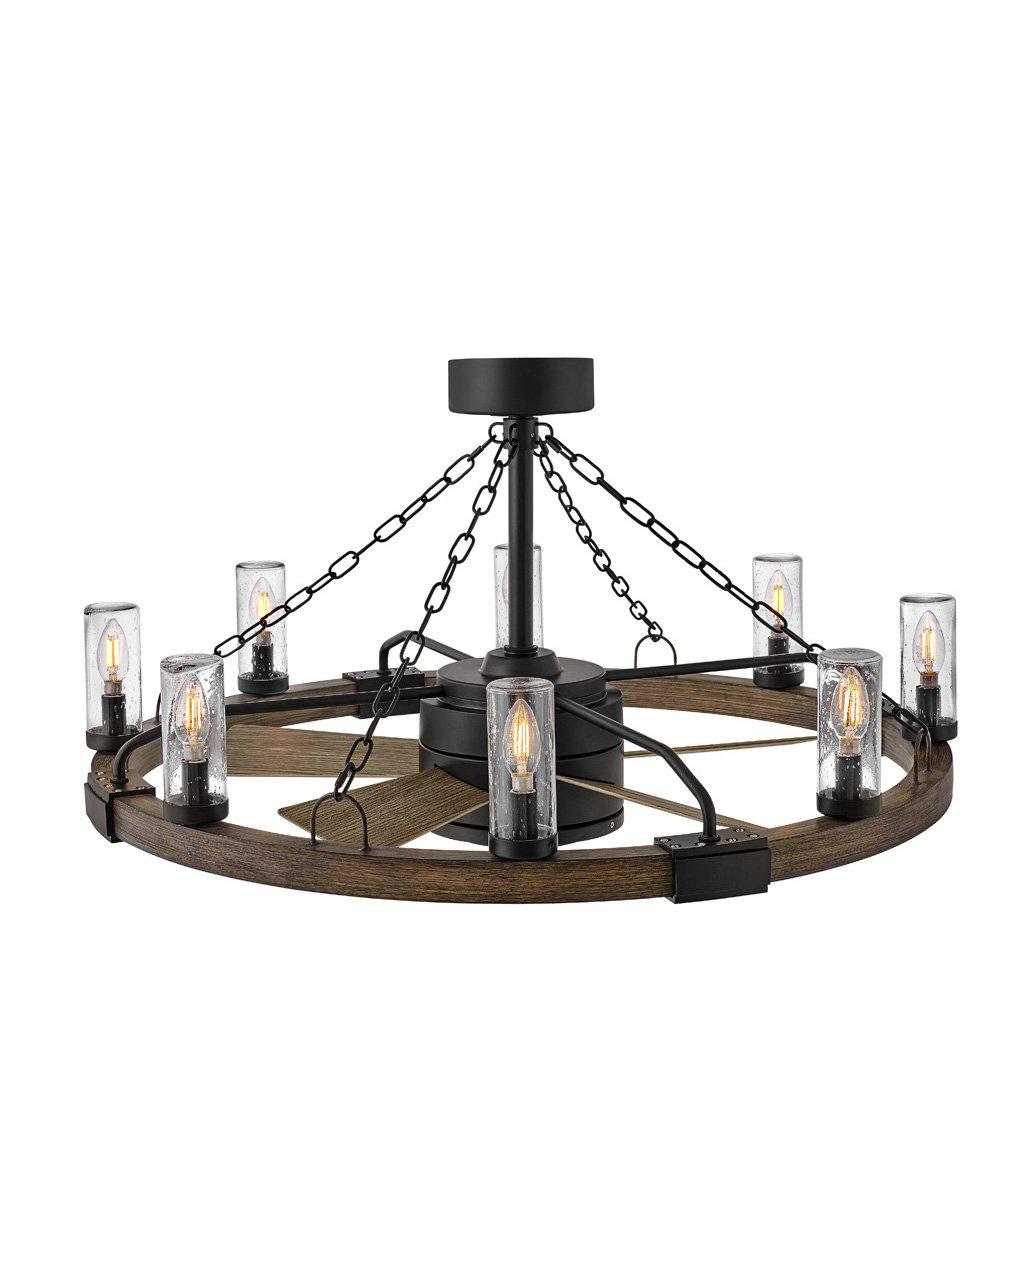 Hinkley Sawyer 36" with 28" LED 902928 Ceiling Fan Hinkley Matte Black with Driftwood accent  